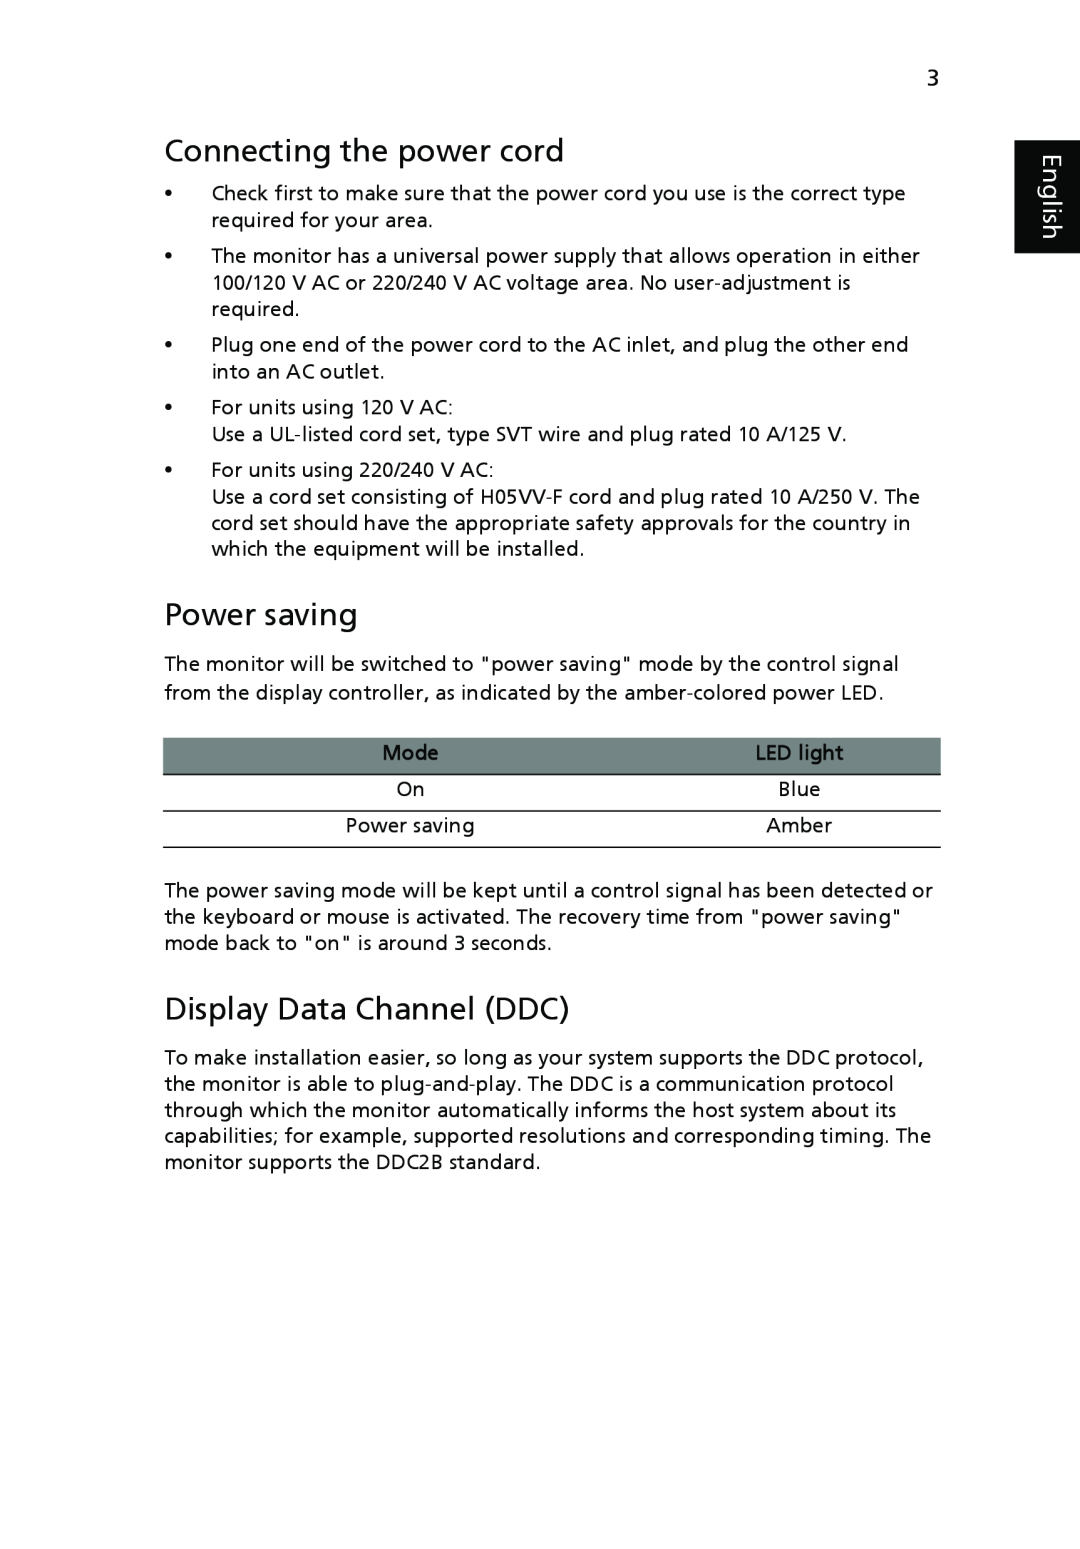 Acer V193 manual Connecting the power cord, Power saving, Display Data Channel DDC, English, Mode, LED light 